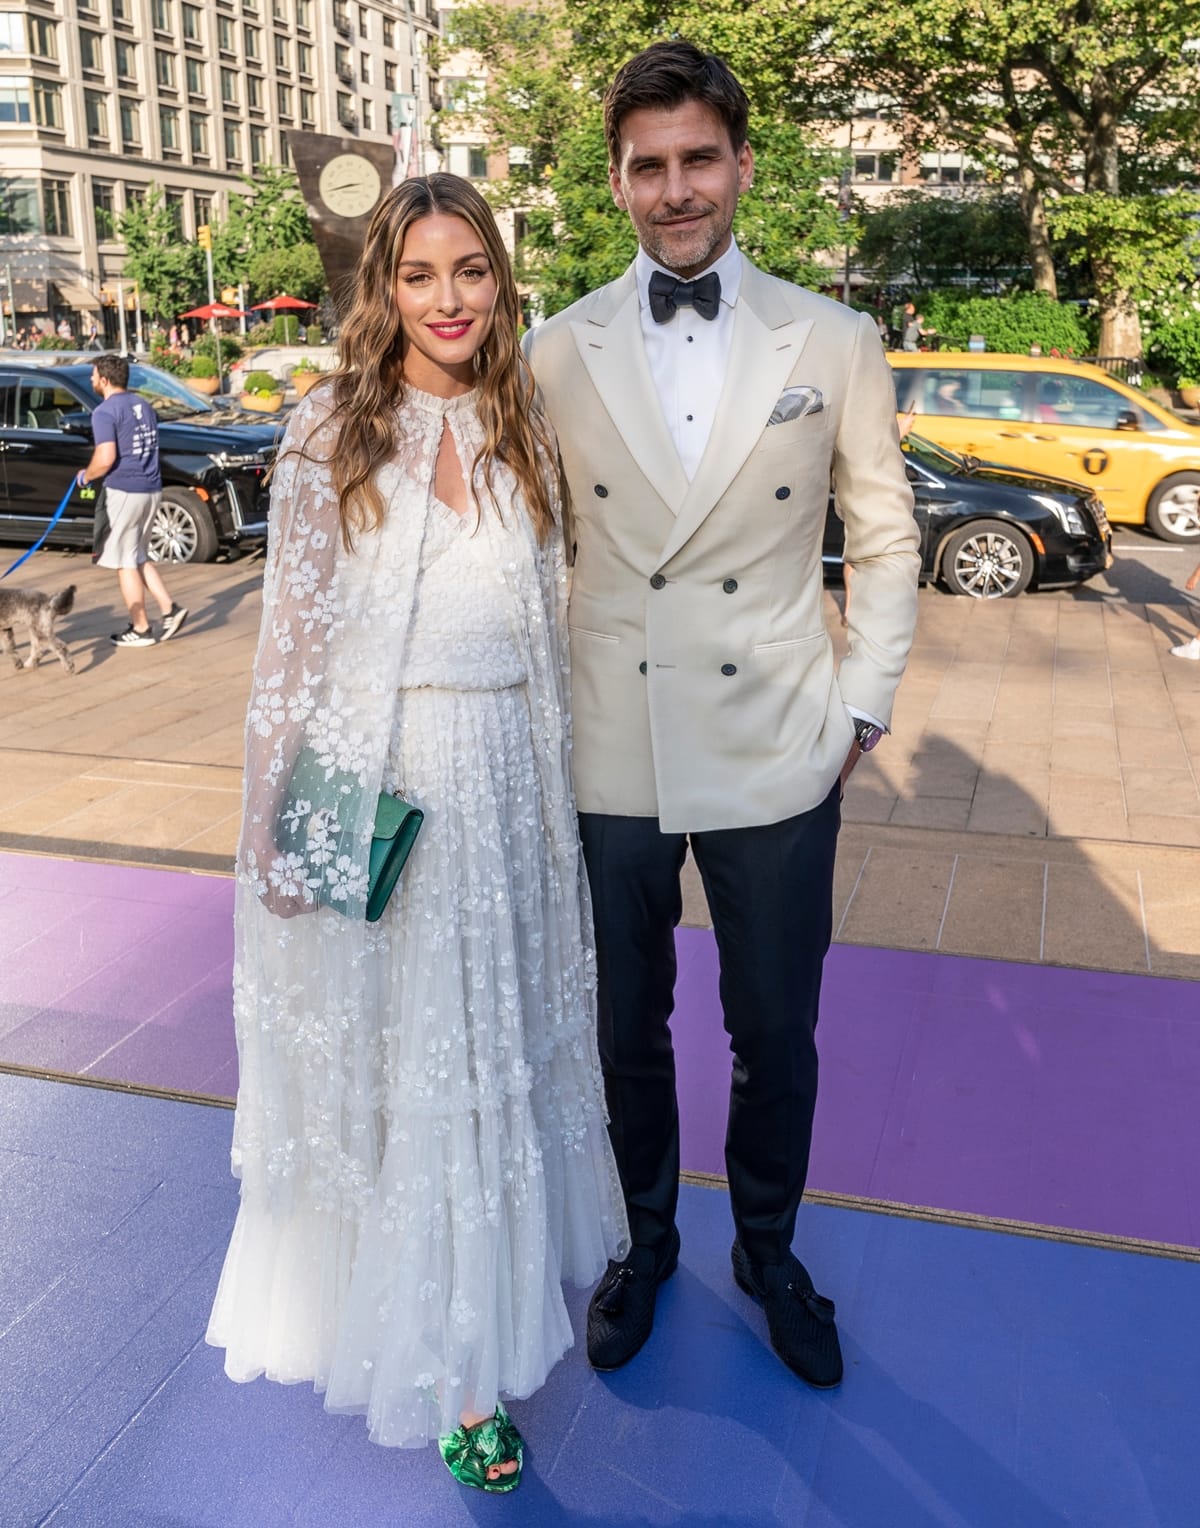 Olivia Palermo in a white Needle & Thread 'Margot' dress and green Giambattista Valli malachite-print knot-detail mules, poses with her husband Johannes Huebl at the American Ballet Theatre Gala